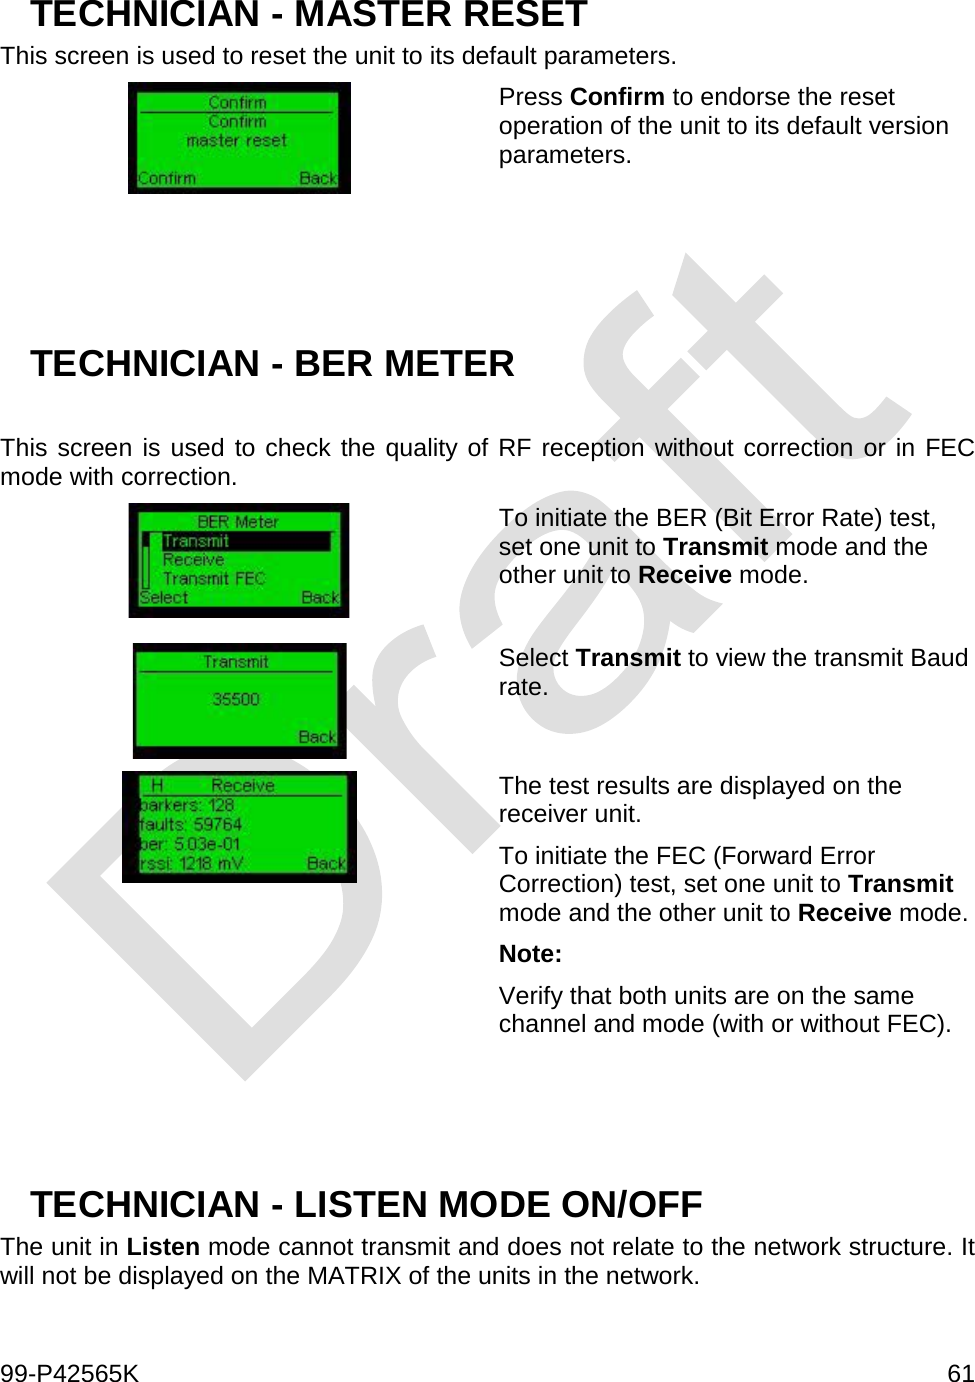  99-P42565K     61  TECHNICIAN - MASTER RESET This screen is used to reset the unit to its default parameters.  Press Confirm to endorse the reset operation of the unit to its default version parameters.     TECHNICIAN - BER METER  This screen is used to check the quality of RF reception without correction or in FEC mode with correction.  To initiate the BER (Bit Error Rate) test, set one unit to Transmit mode and the other unit to Receive mode.   Select Transmit to view the transmit Baud rate.   The test results are displayed on the receiver unit. To initiate the FEC (Forward Error Correction) test, set one unit to Transmit mode and the other unit to Receive mode. Note: Verify that both units are on the same channel and mode (with or without FEC).    TECHNICIAN - LISTEN MODE ON/OFF The unit in Listen mode cannot transmit and does not relate to the network structure. It will not be displayed on the MATRIX of the units in the network. 